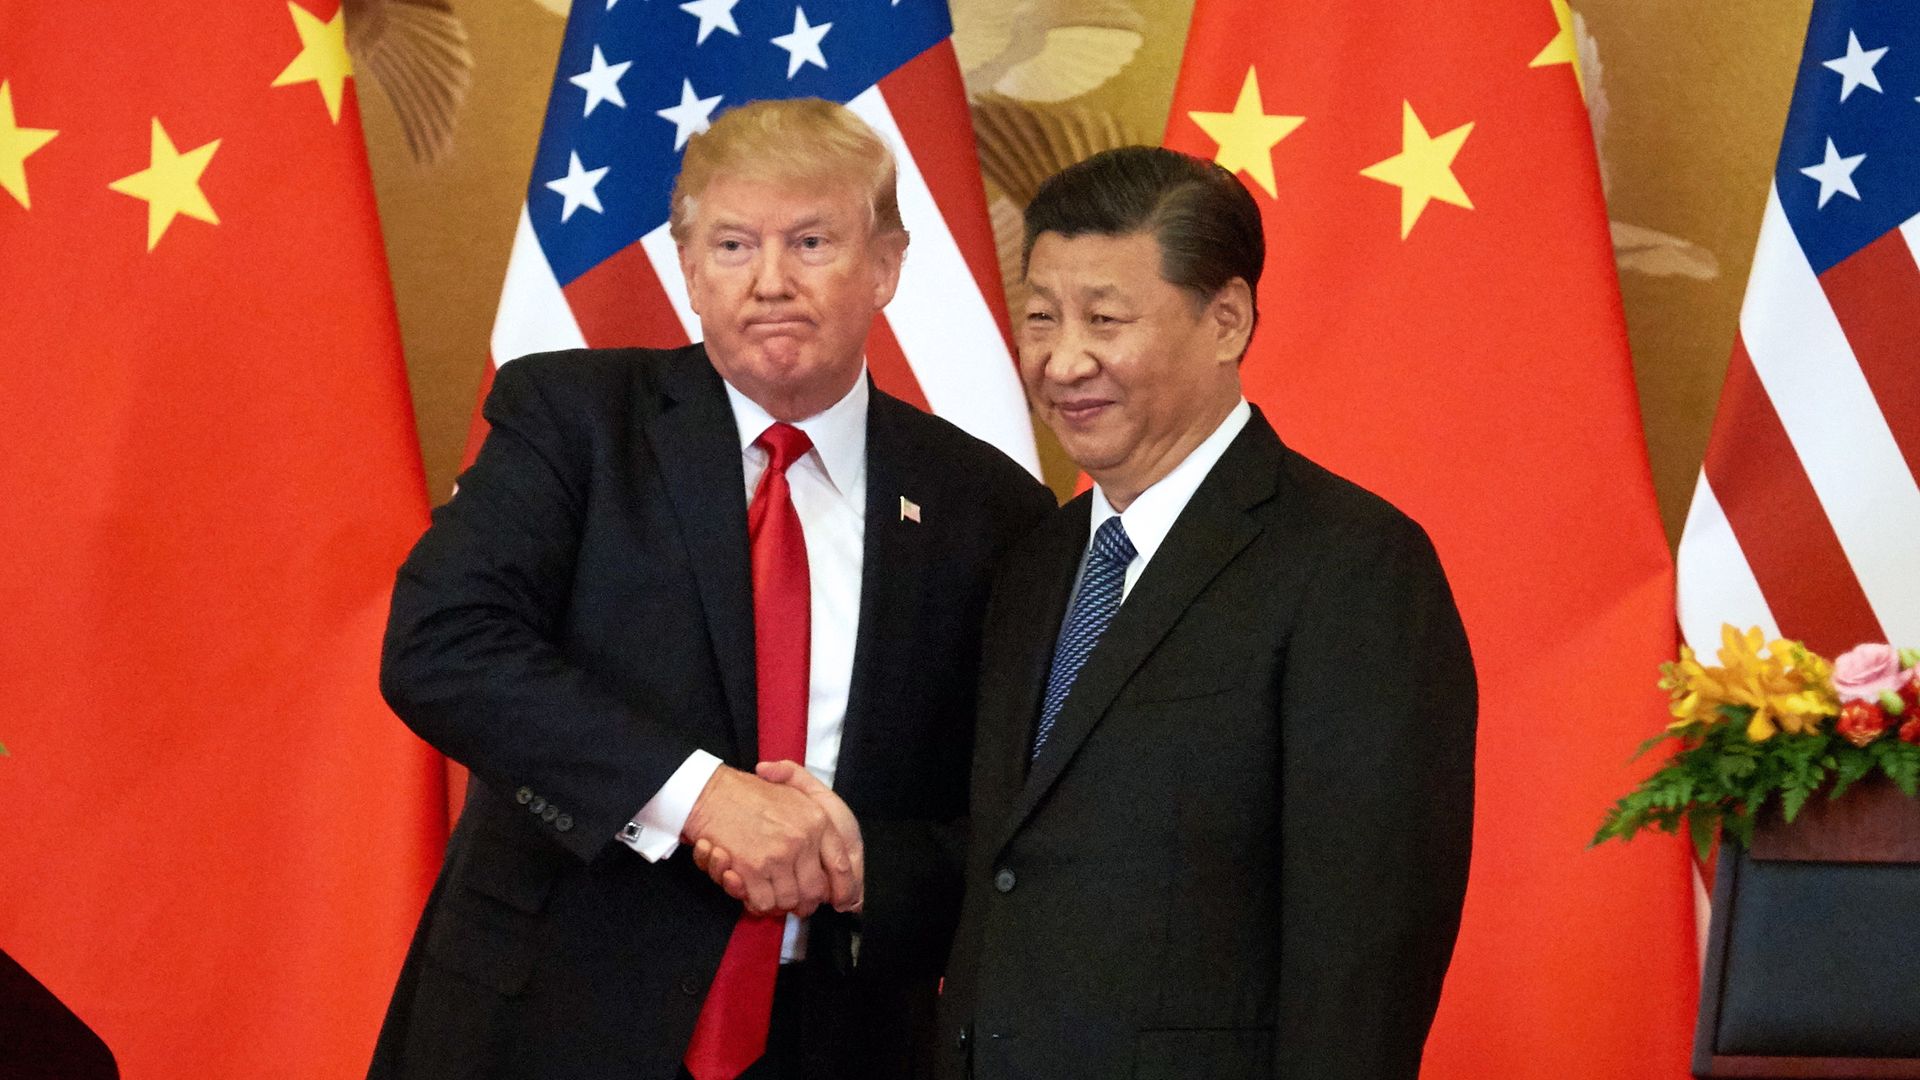 President Trump and Xi Jingping shake hands in front of flags from their respective countries 